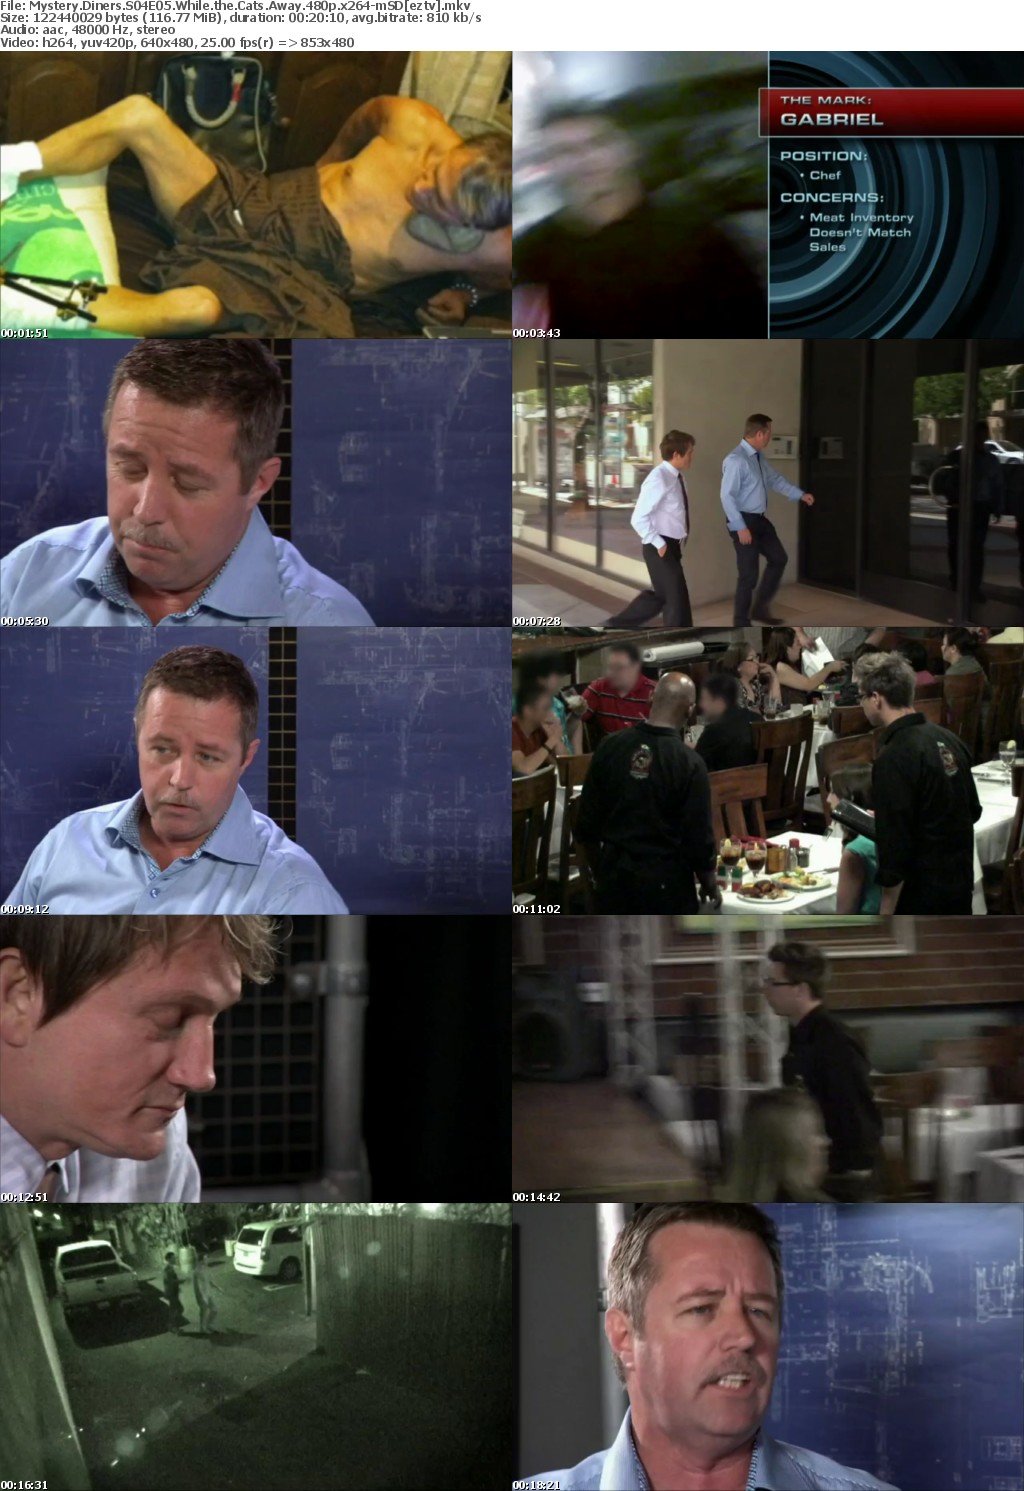 Mystery Diners S04E05 While the Cats Away 480p x264-mSD